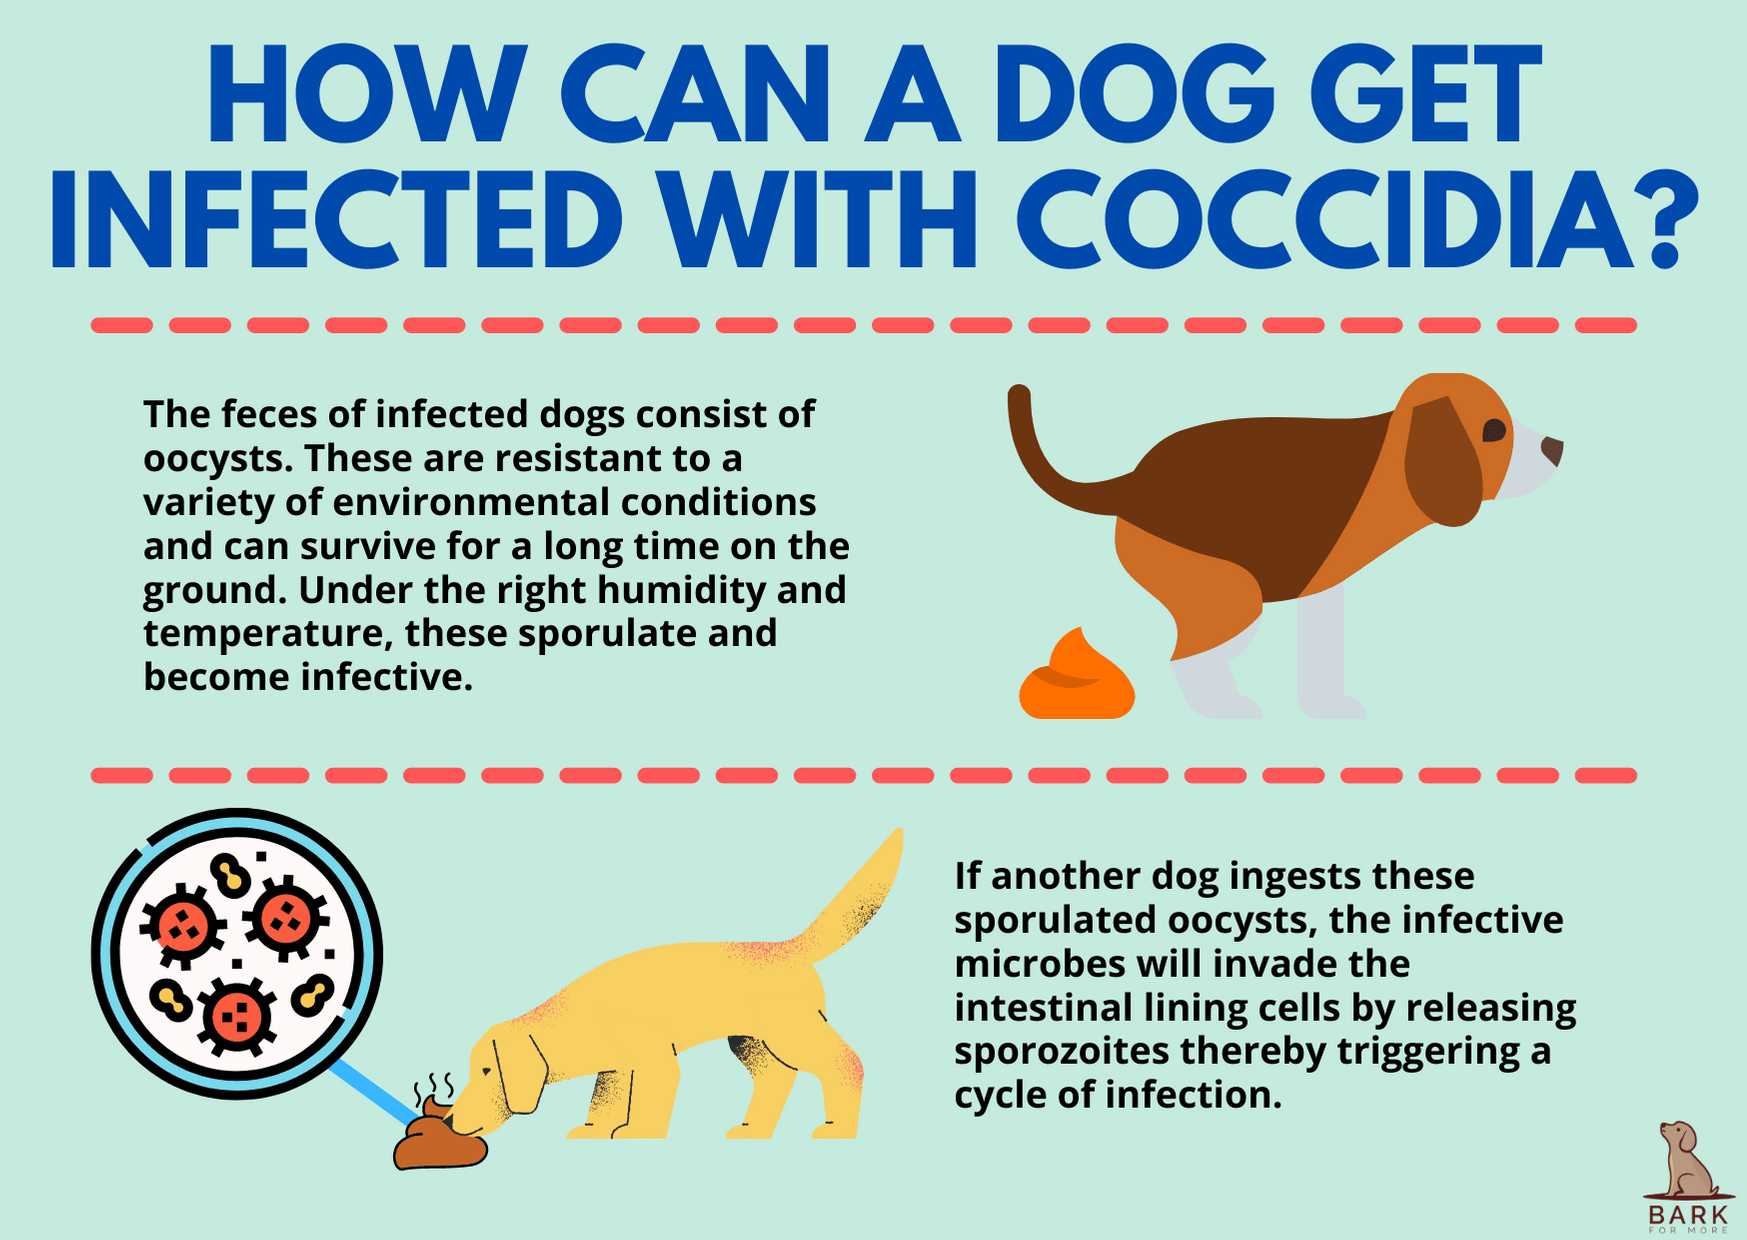 How can a dog get infected with Coccidia